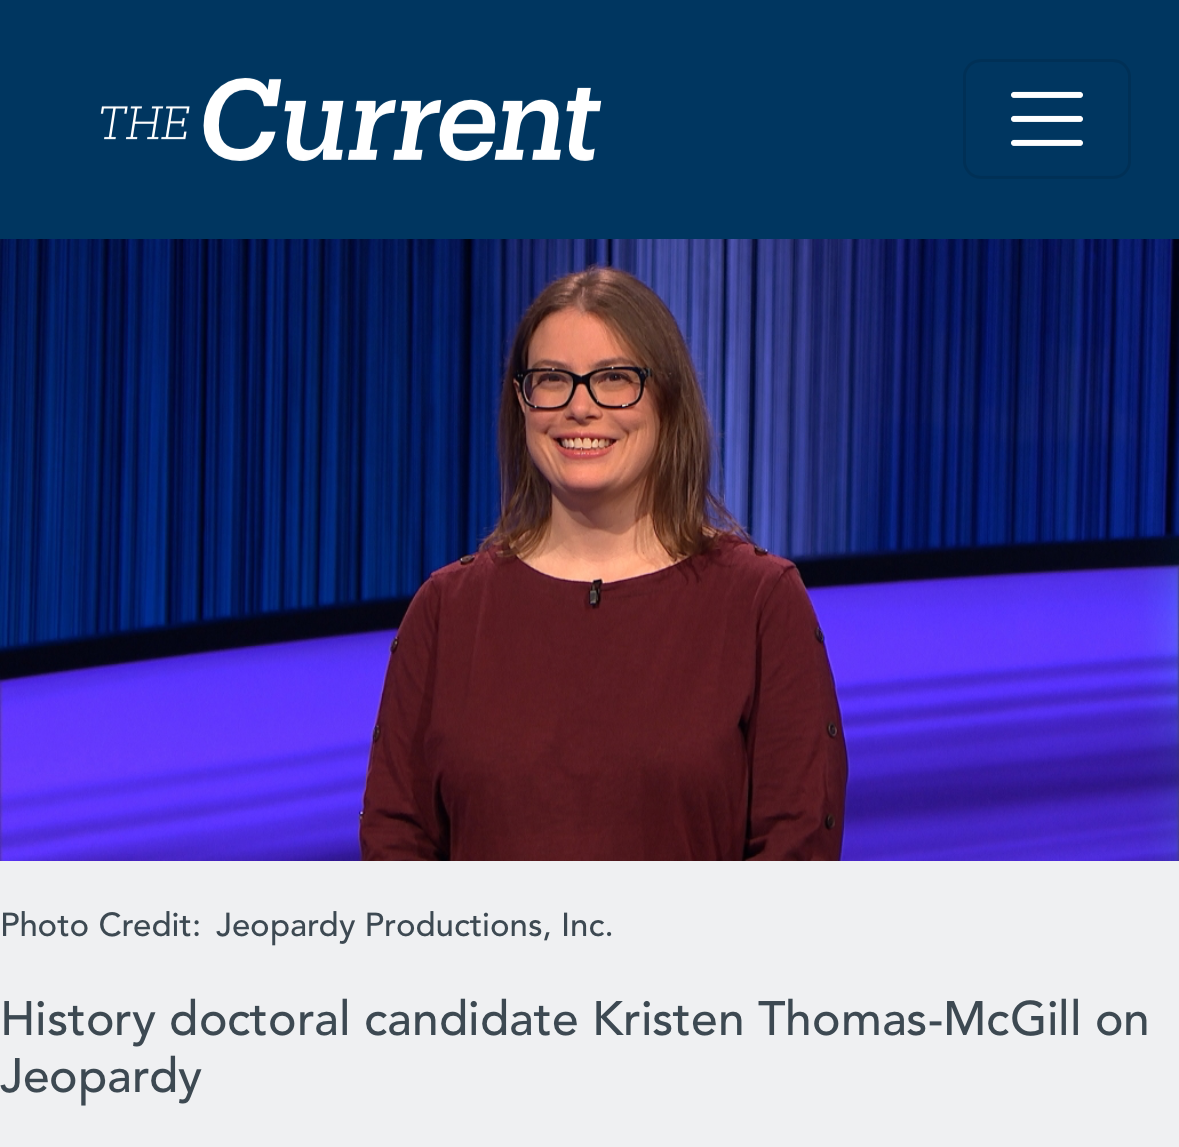 PhD Candidate Kristen Thomas-McGill recognized in The Current for her success on Jeopardy and her innovative scholarship